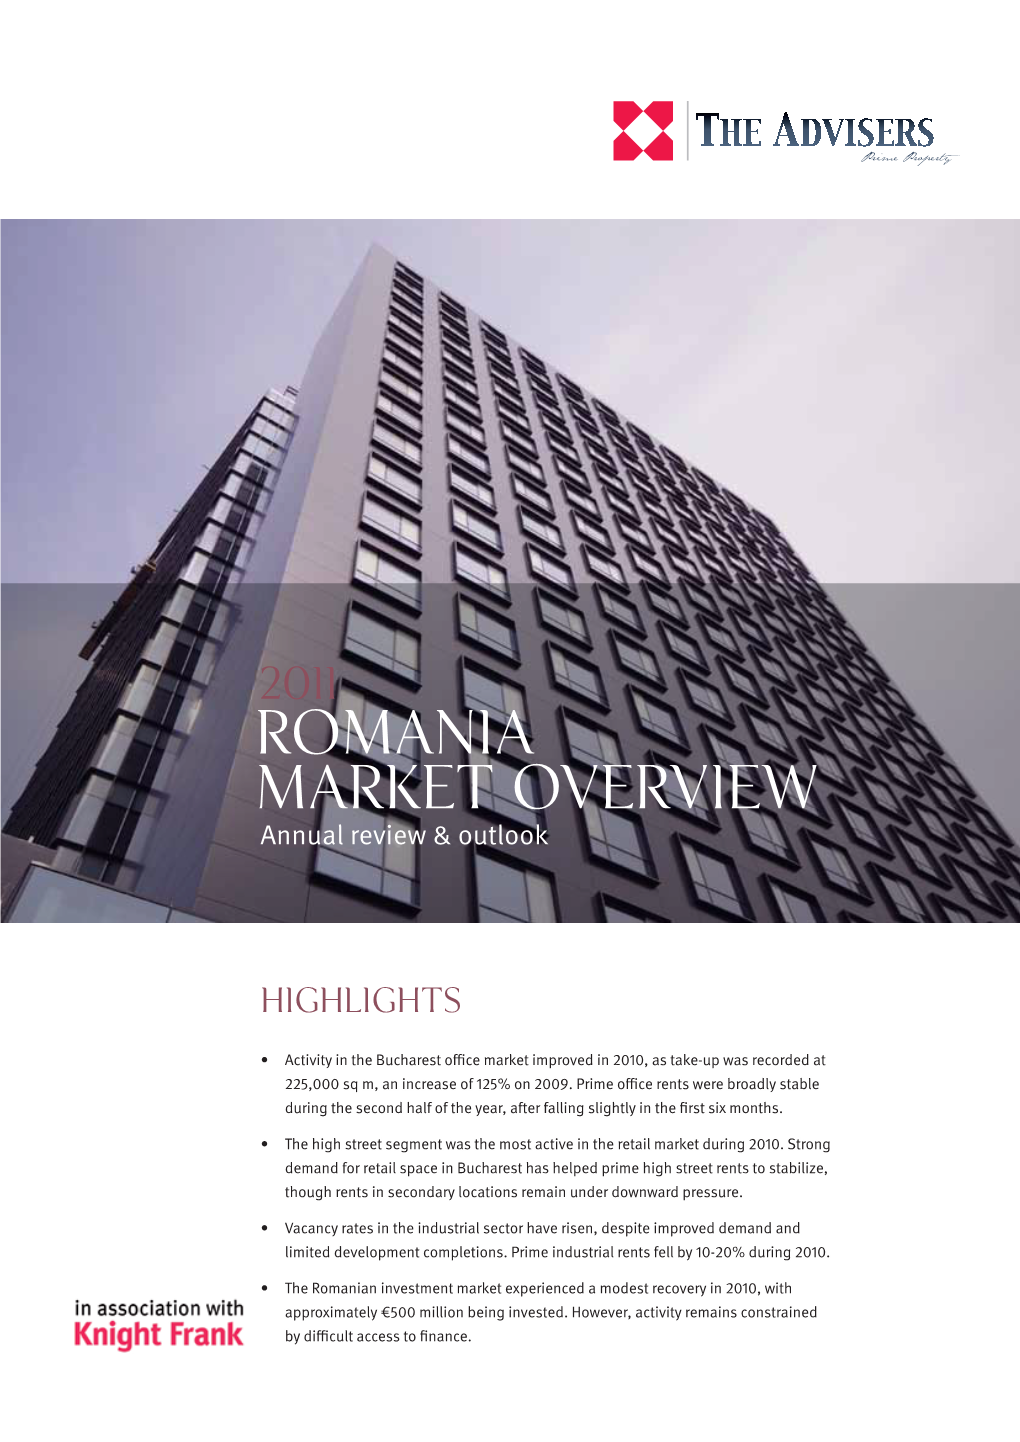 Romania MARKET Overview Annual Review & Outlook